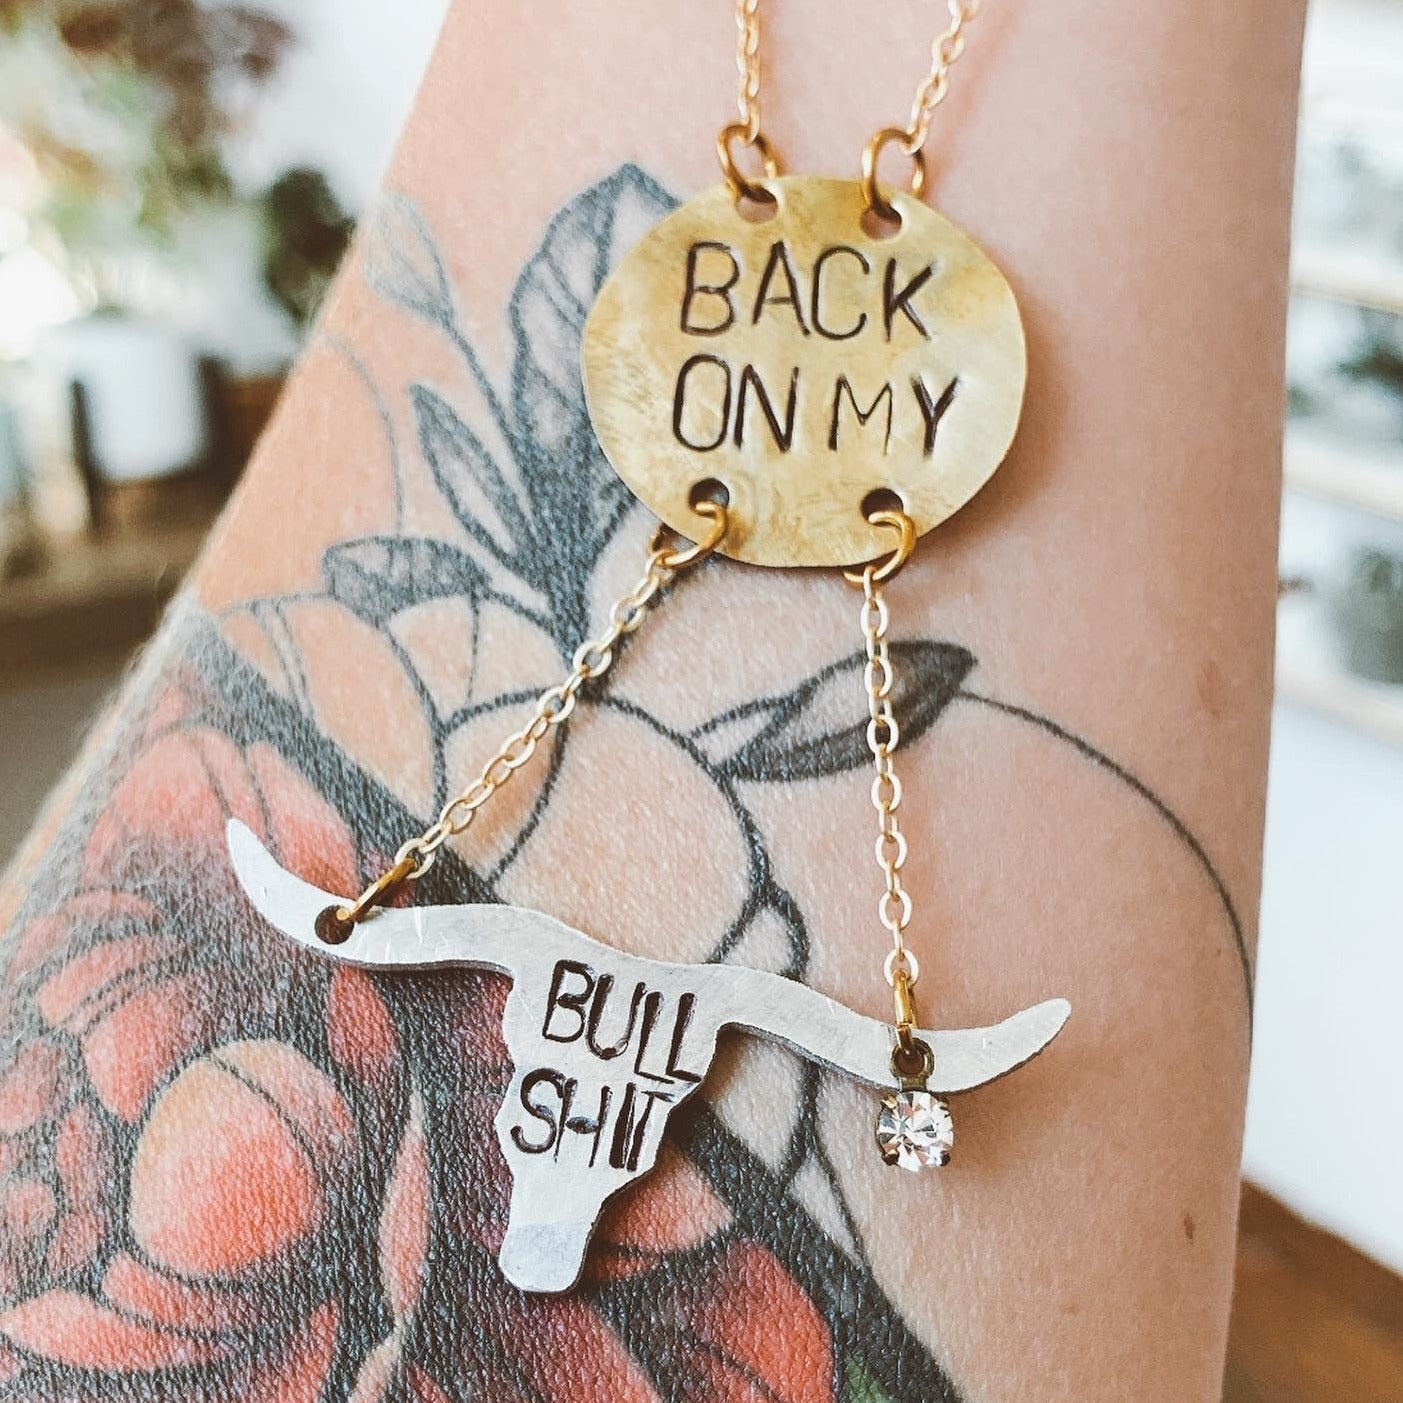 "Back on my Bullshit" necklace. Hand-stamped aluminum and brass with a texas long horn cattle silhouette. Handmade fashion accessories by Unique Twist Jewelry.